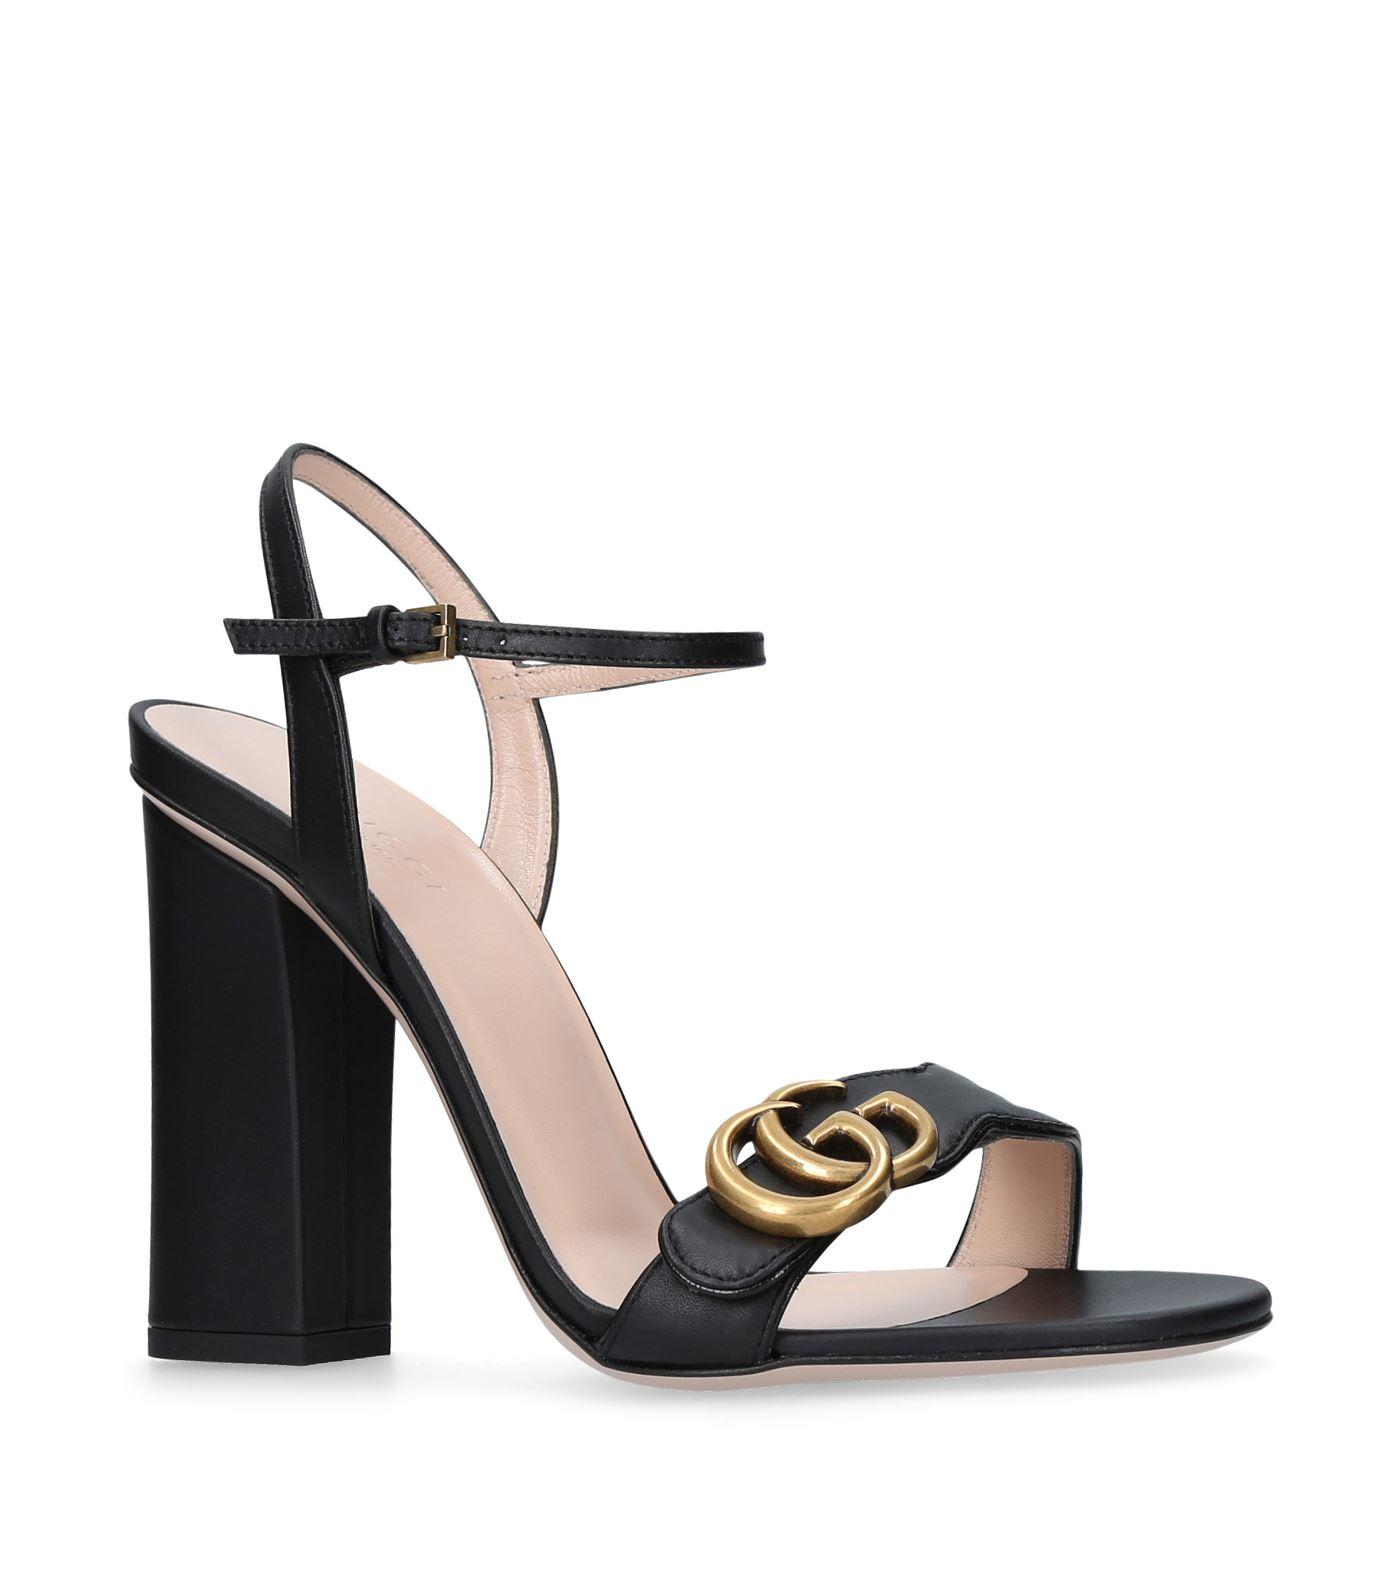 Lyst Gucci  Marmont Sandals  105 in Black Save 18 